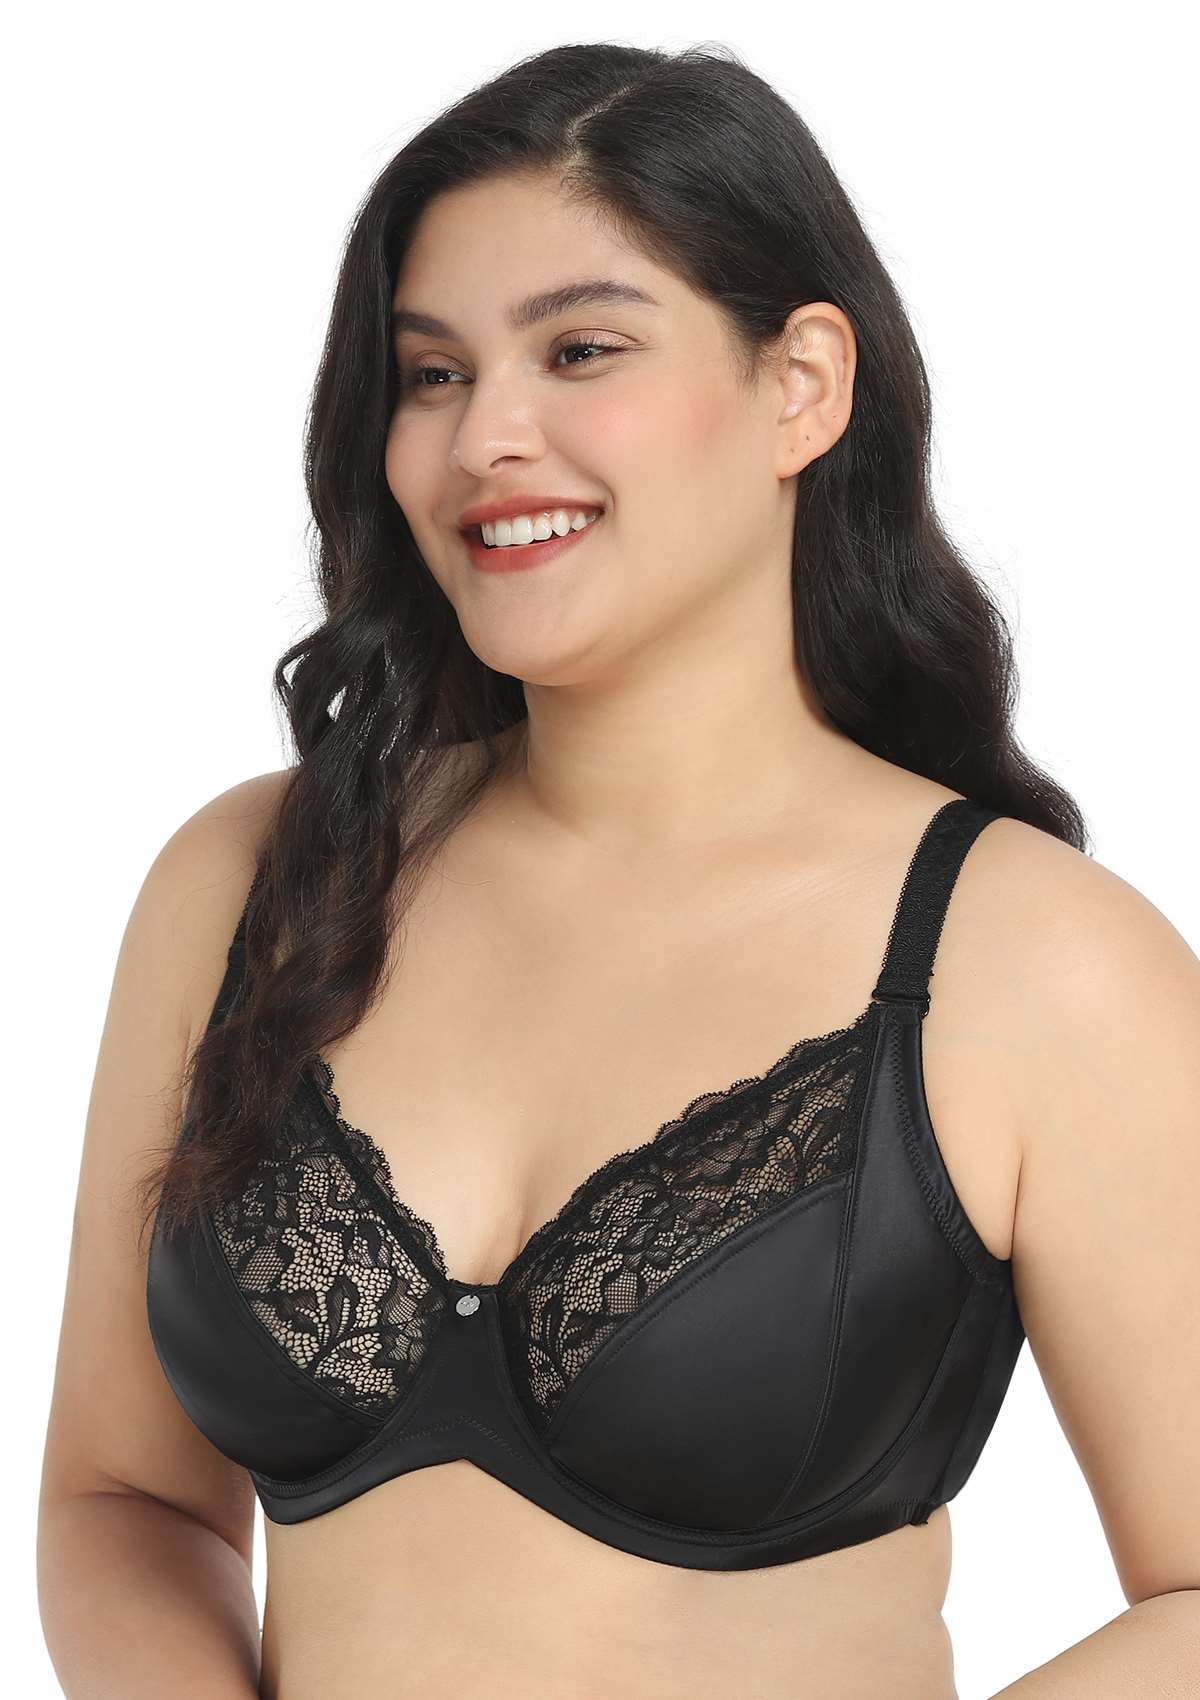 HSIA Foxy Satin Silky Full Coverage Underwire Bra With Floral Lace Trim - Black / 44 / H